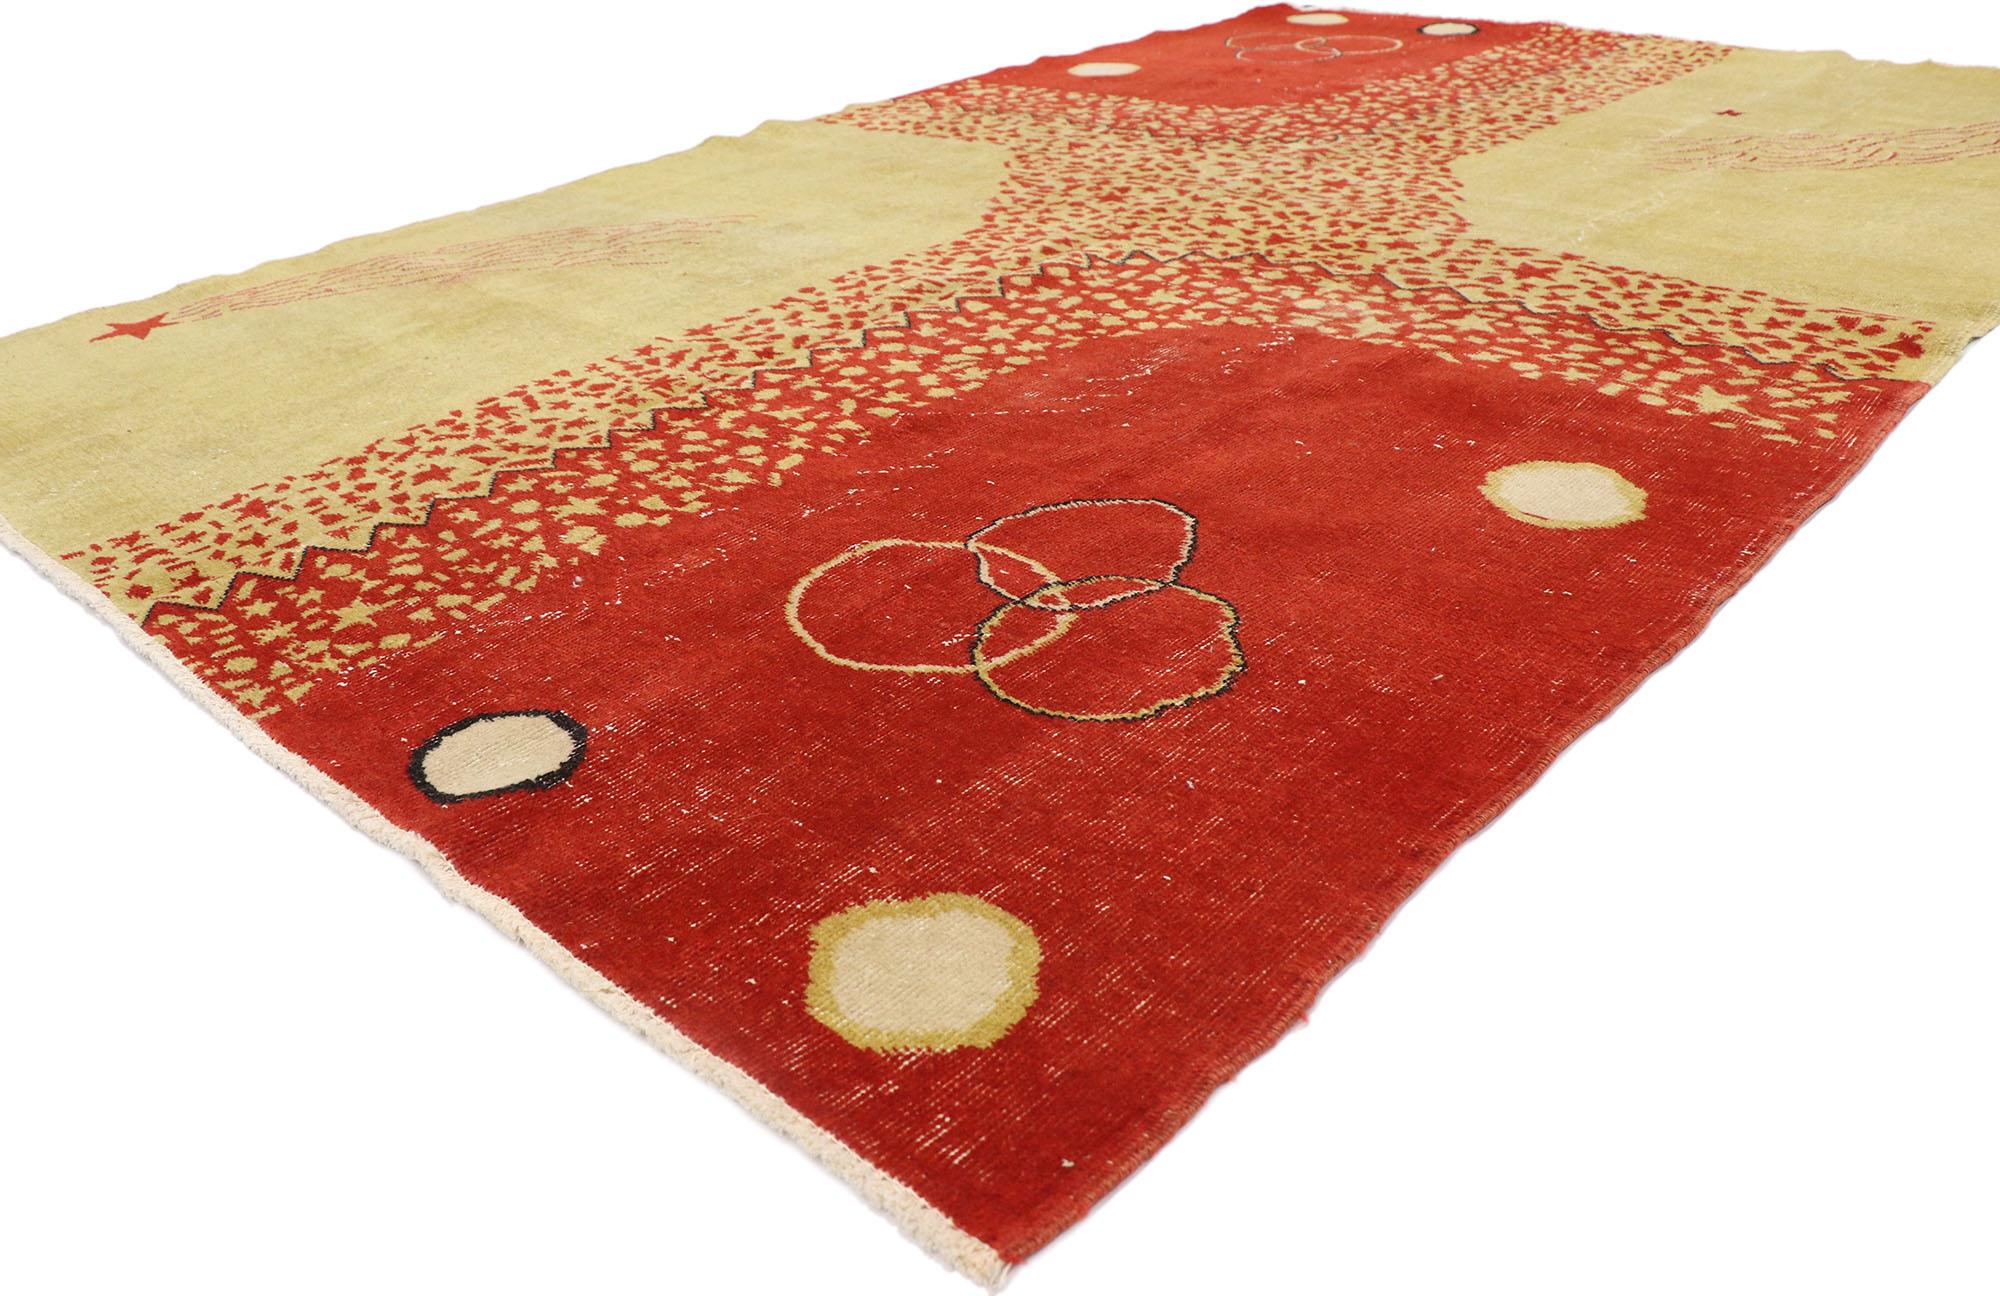 53663 Zeki Muren vintage Turkish Sivas rug inspired by Wassily Kandinsky 06'06 x 09'11. Drawing inspiration from Wassily Kandinsky and Abstract Expressionism, this hand-knotted wool Zeki Muren vintage Turkish Sivas rug is a captivating vision of